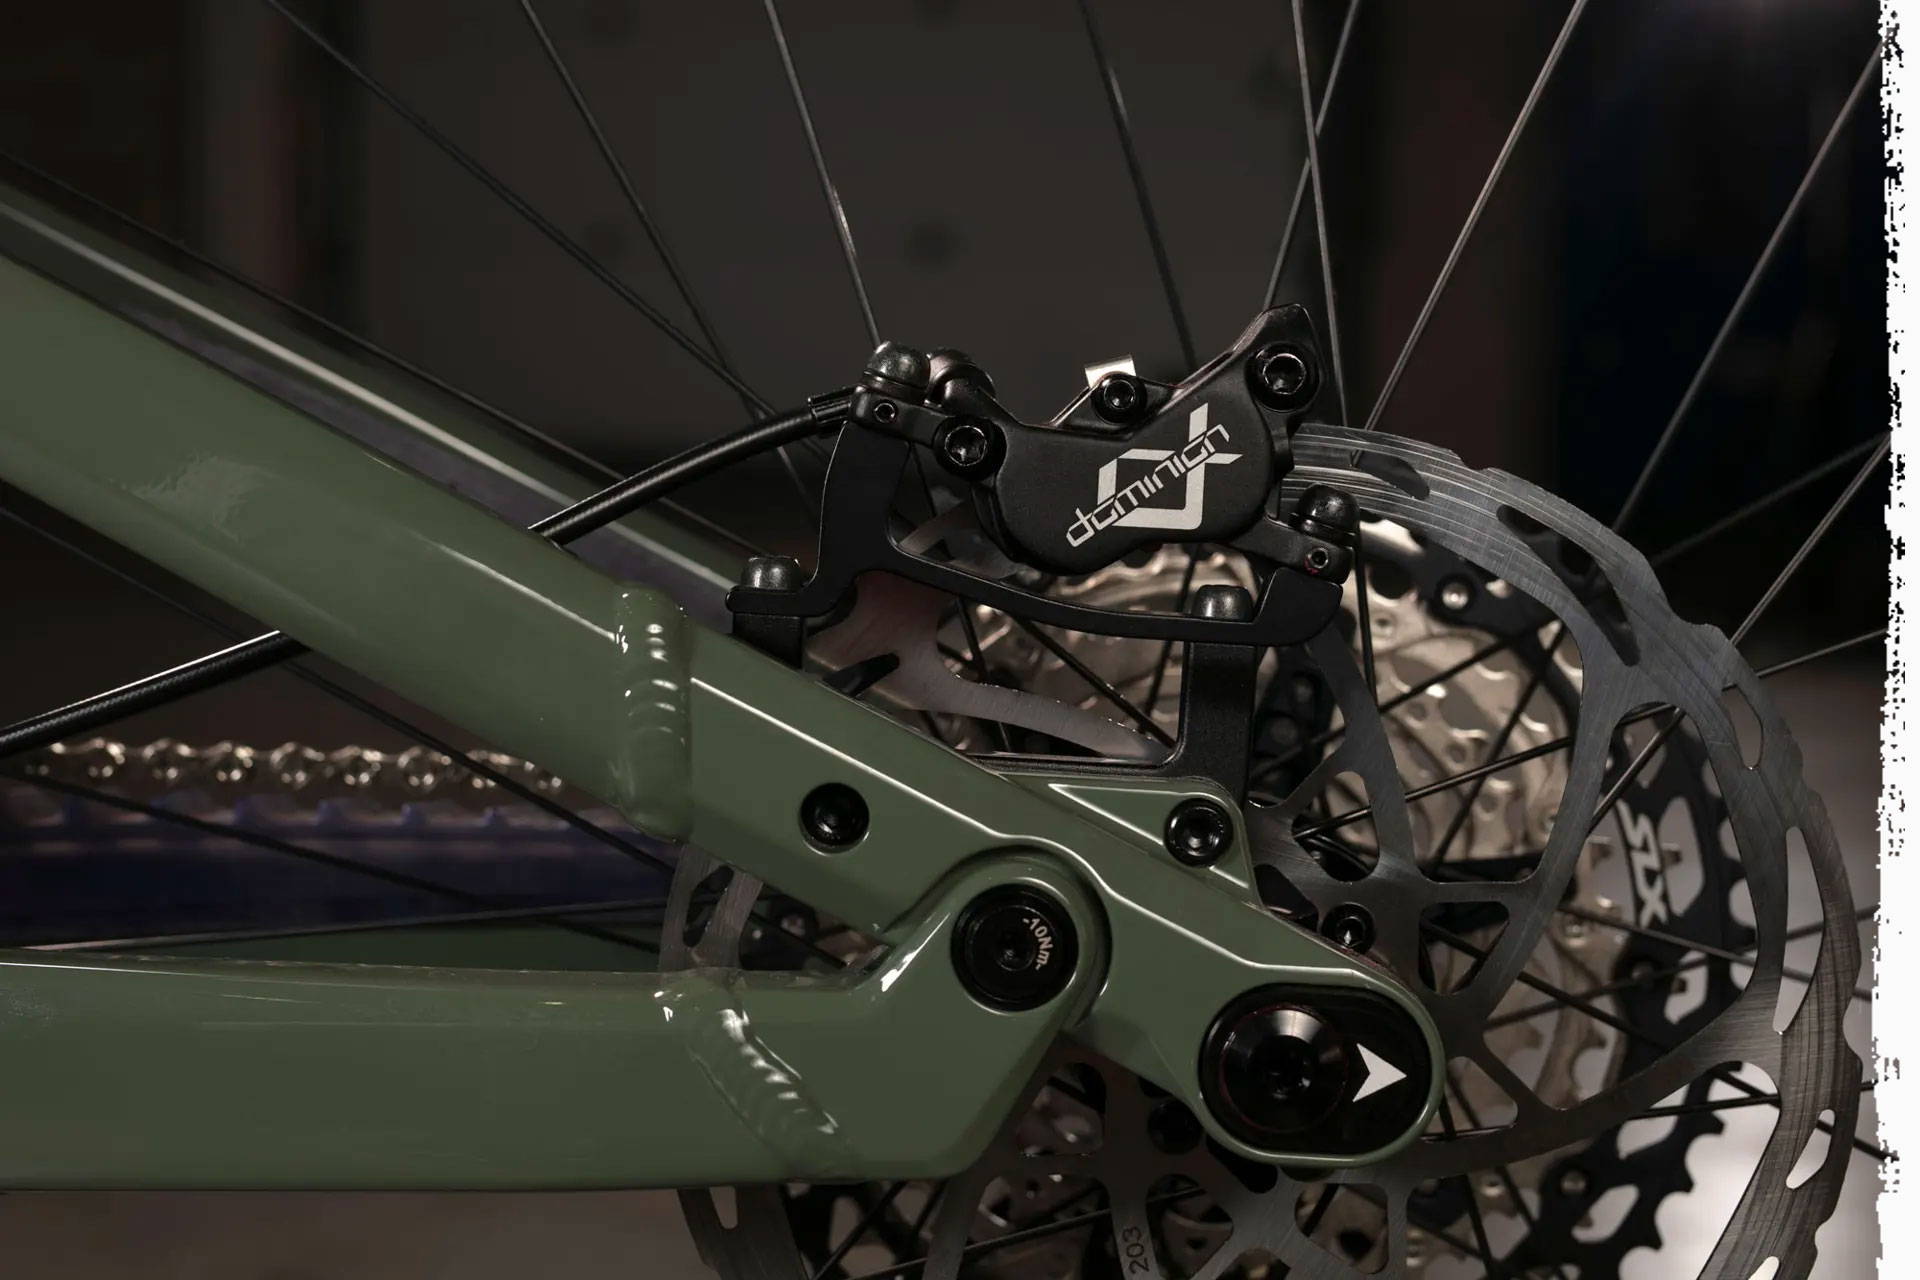 Privateer 161 frame with Hayes Dominion disc brakes